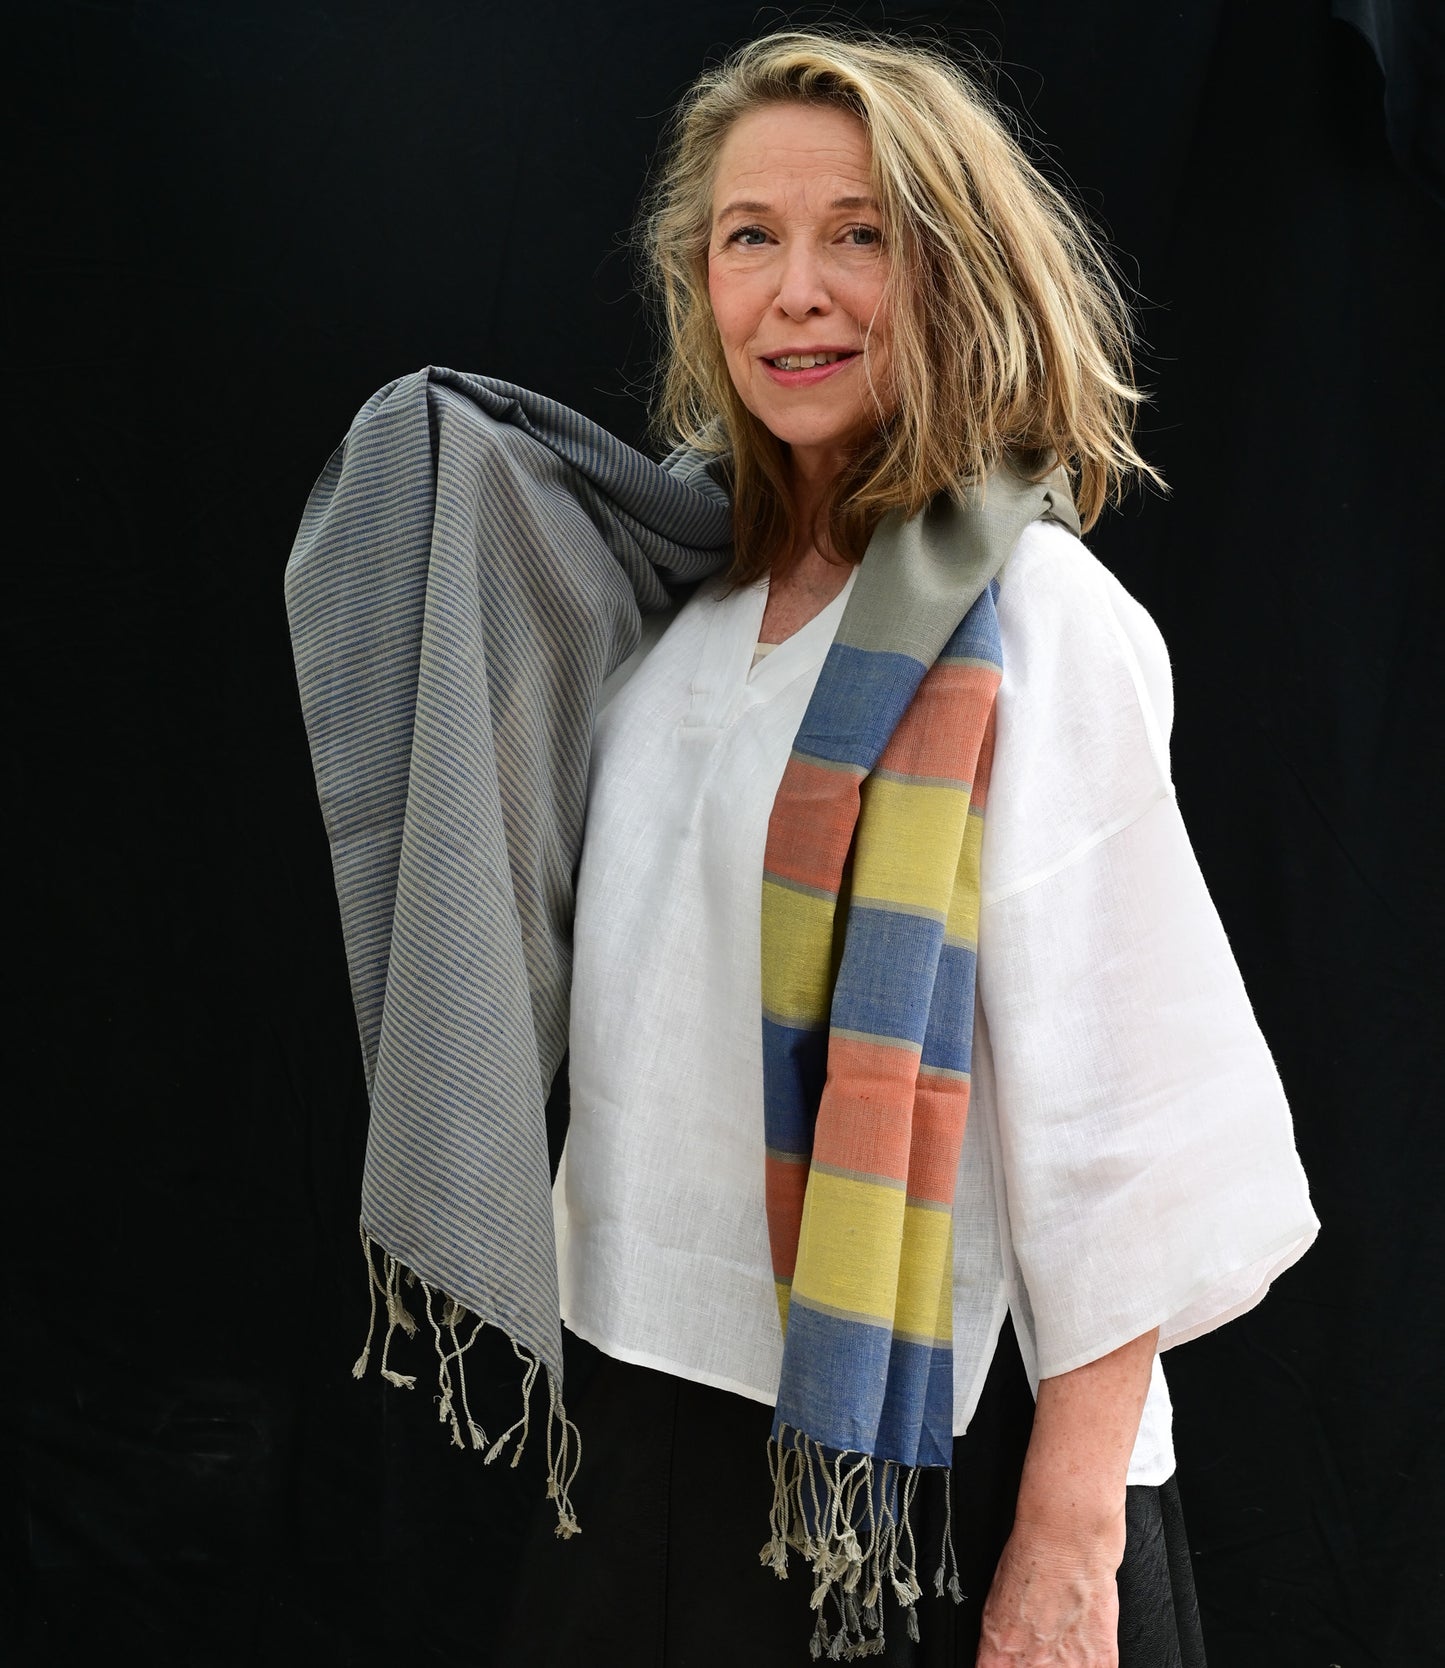 Scarf organic cotton gray blue with orange and yellow